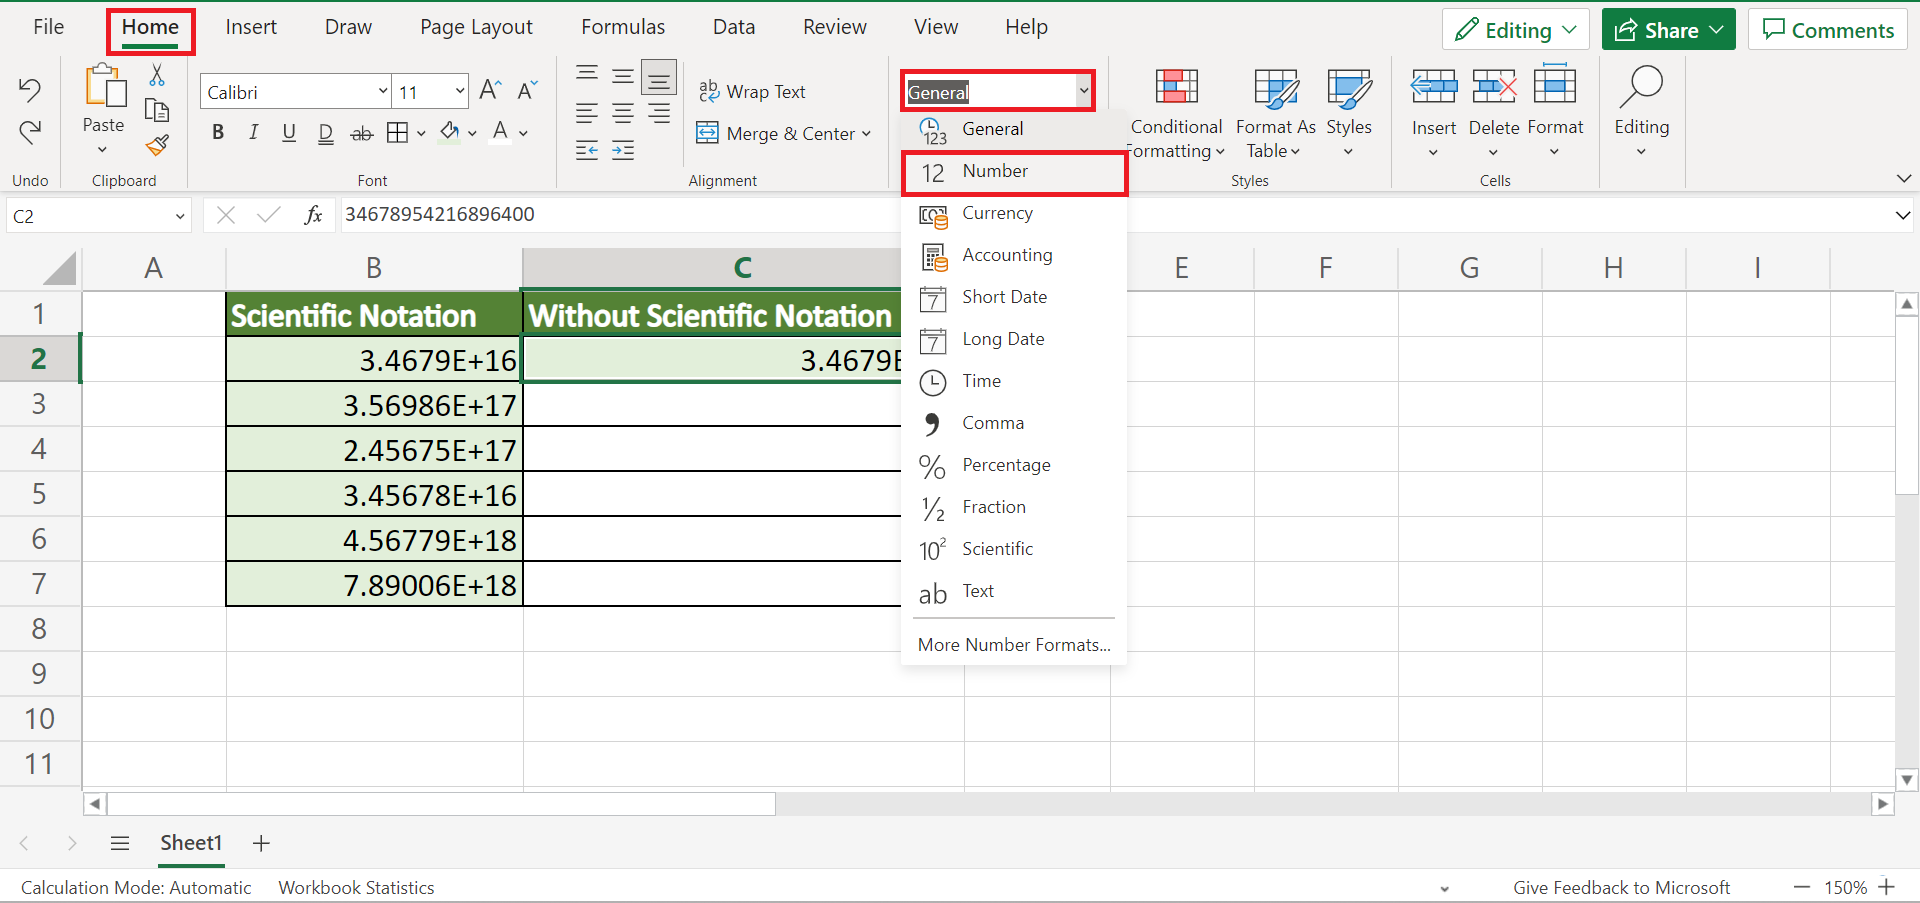 Get Rid of Scientific Notation in Excel